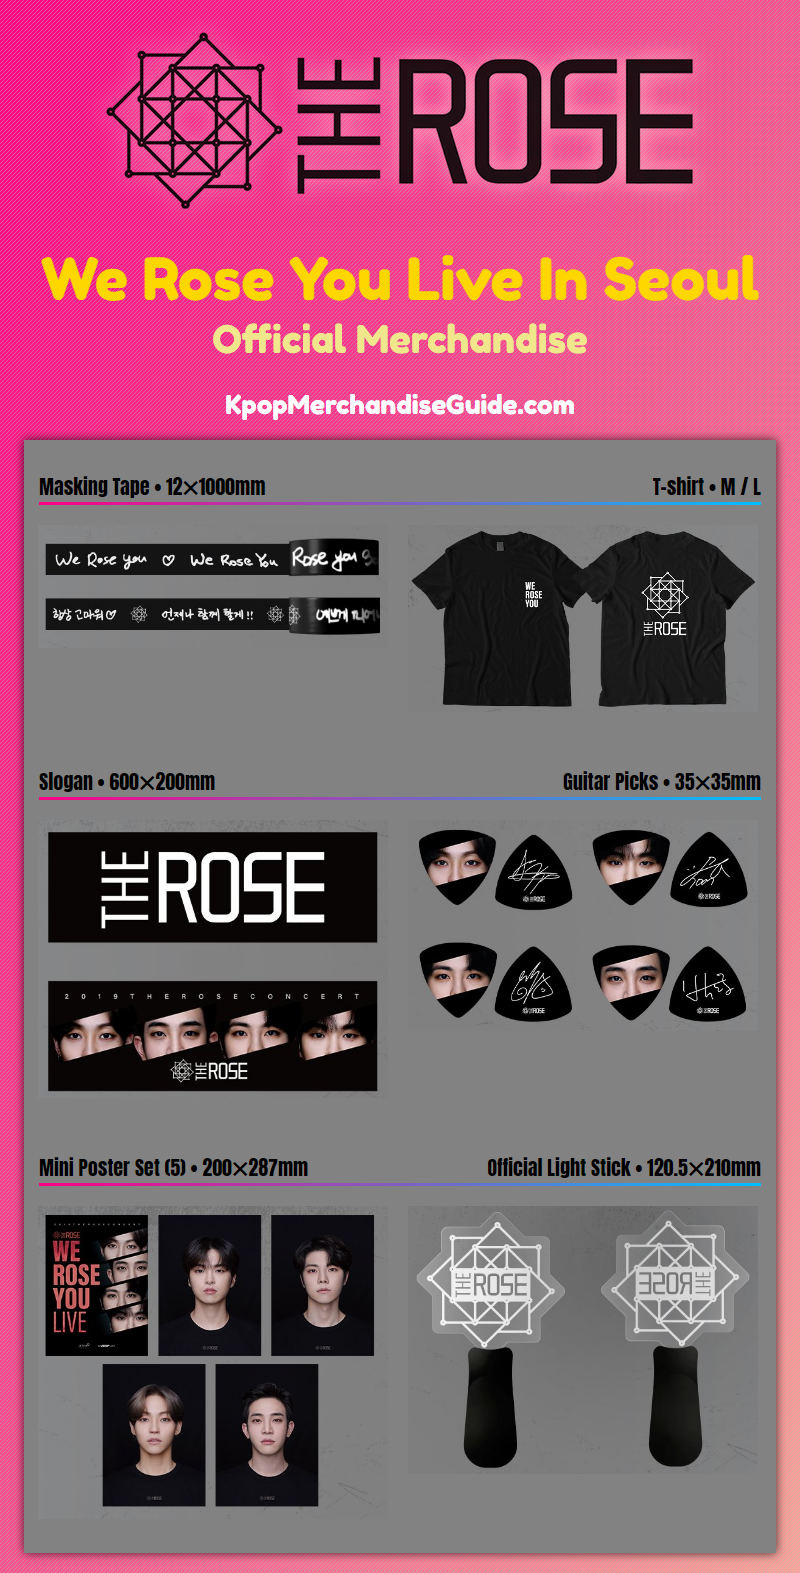 The Rose We Rose You Live In Seoul Concert Merchandise